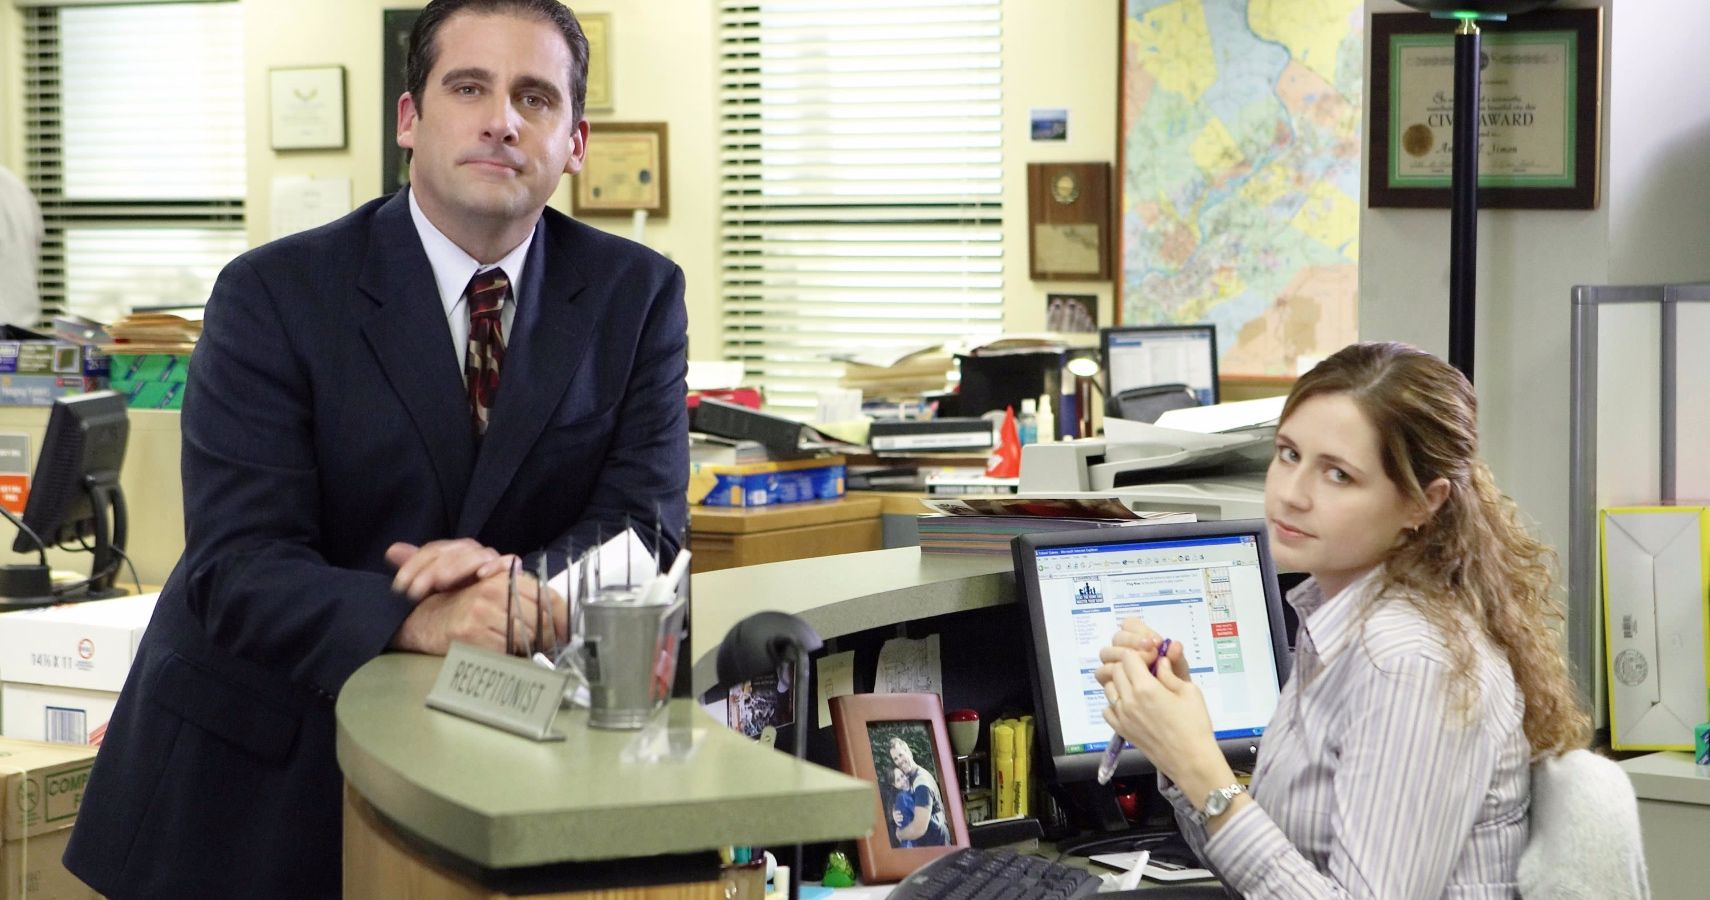 The Office: 10 Jokes That Have Already Aged Poorly